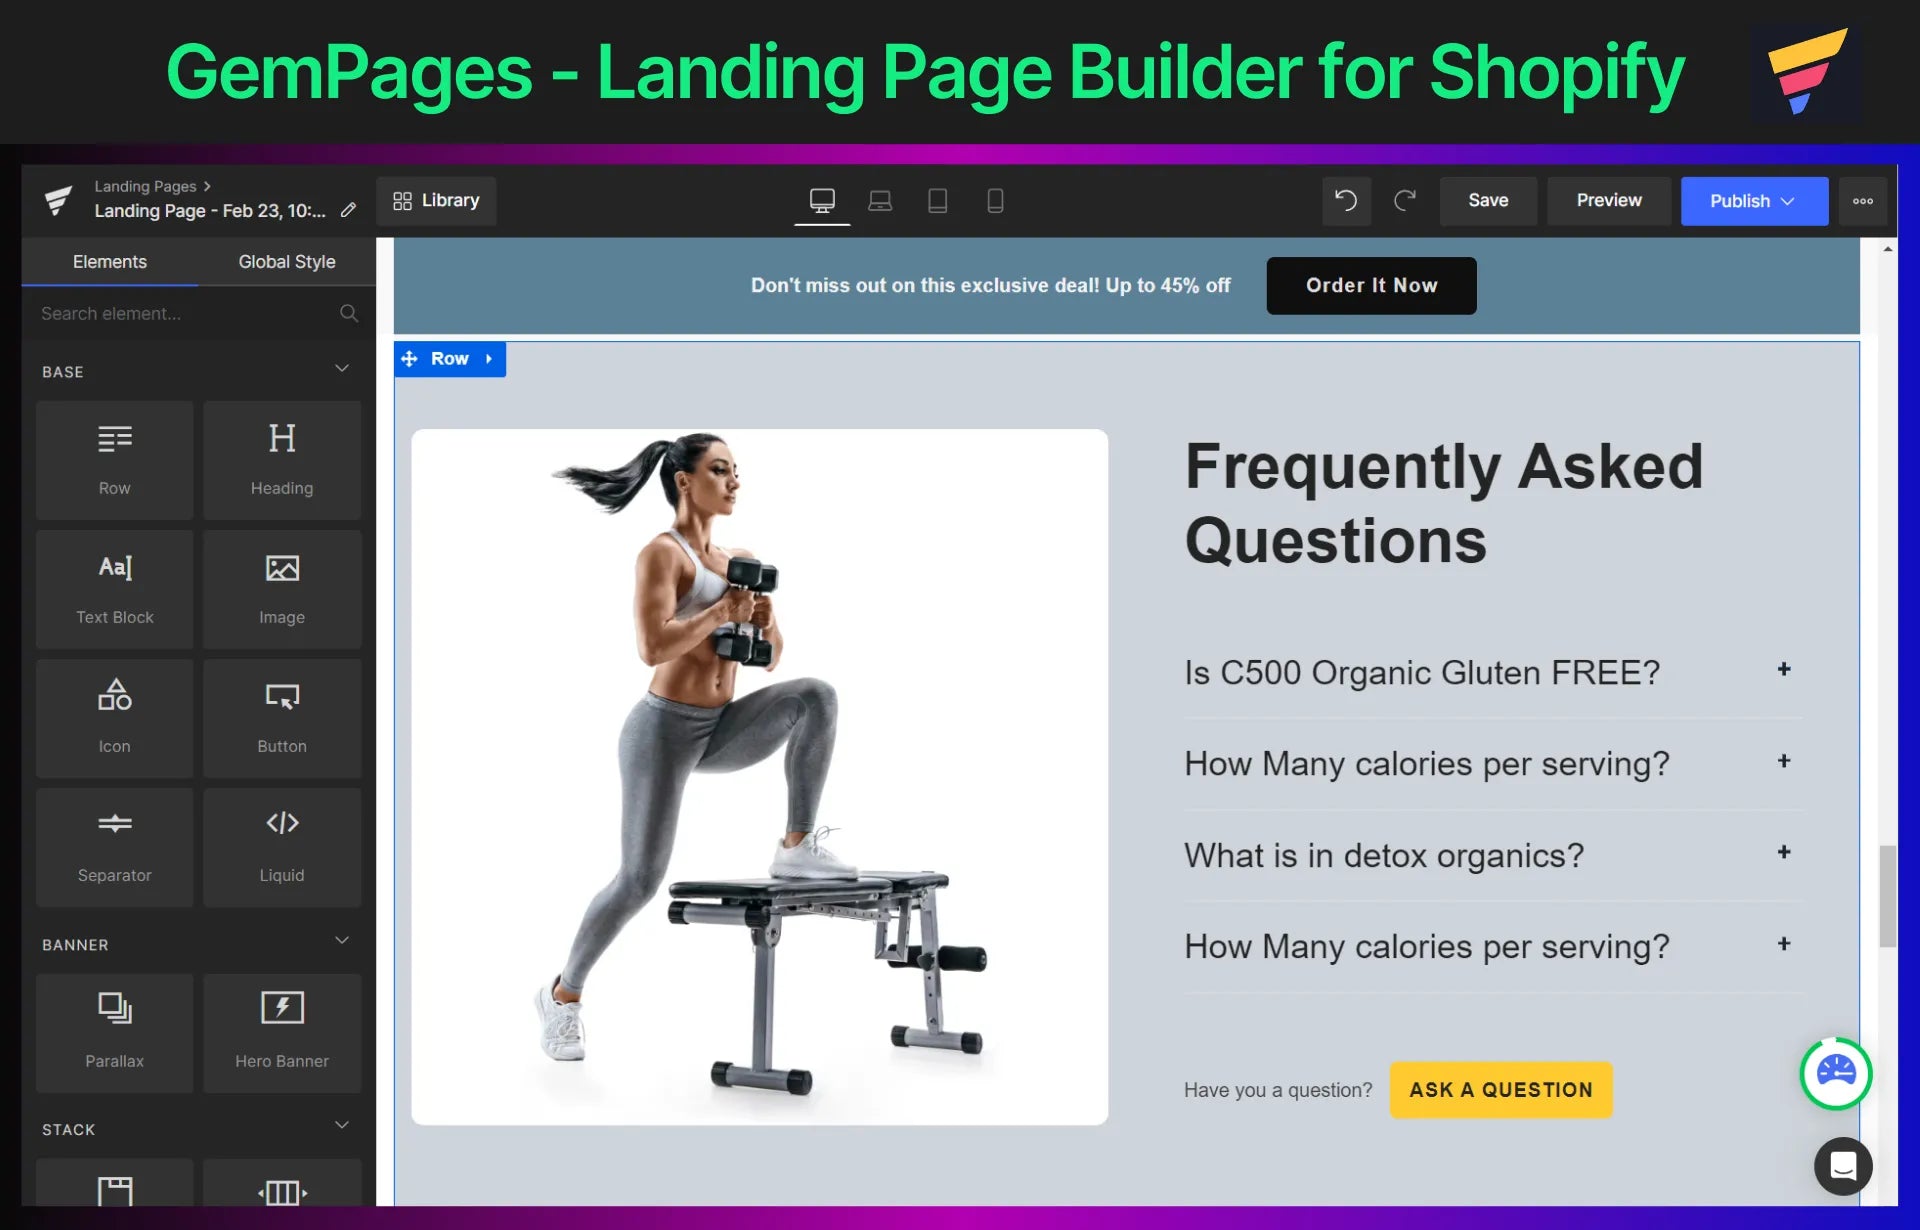 GemPages - Landing Page Builder for Shopify